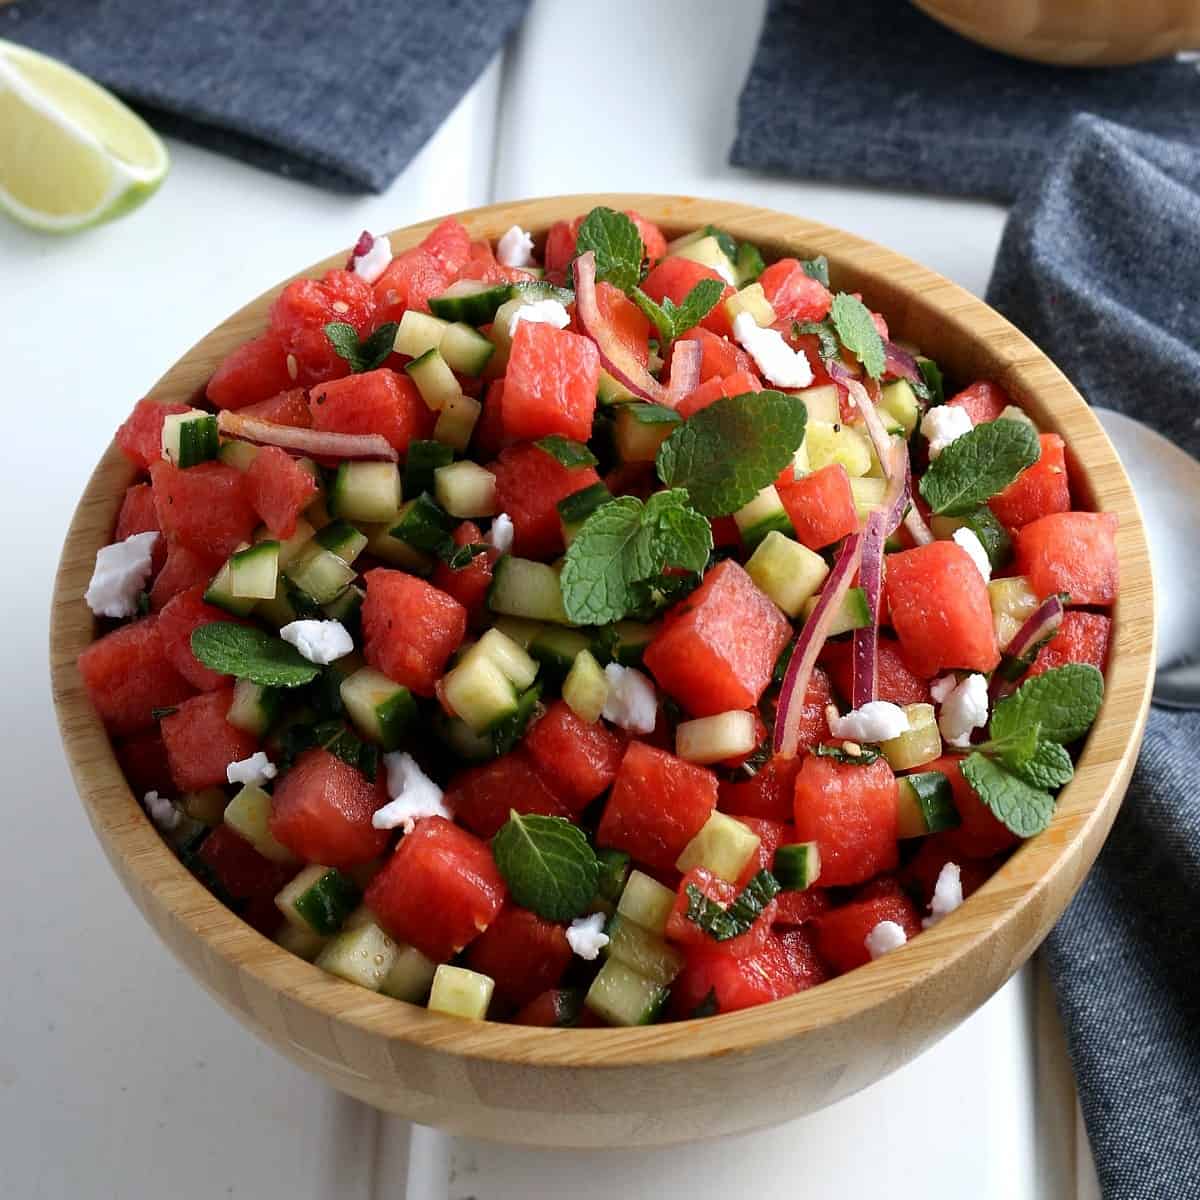 A centered wood bowl that is full of watermelon feta salad with a gray cloth napkin on the side.